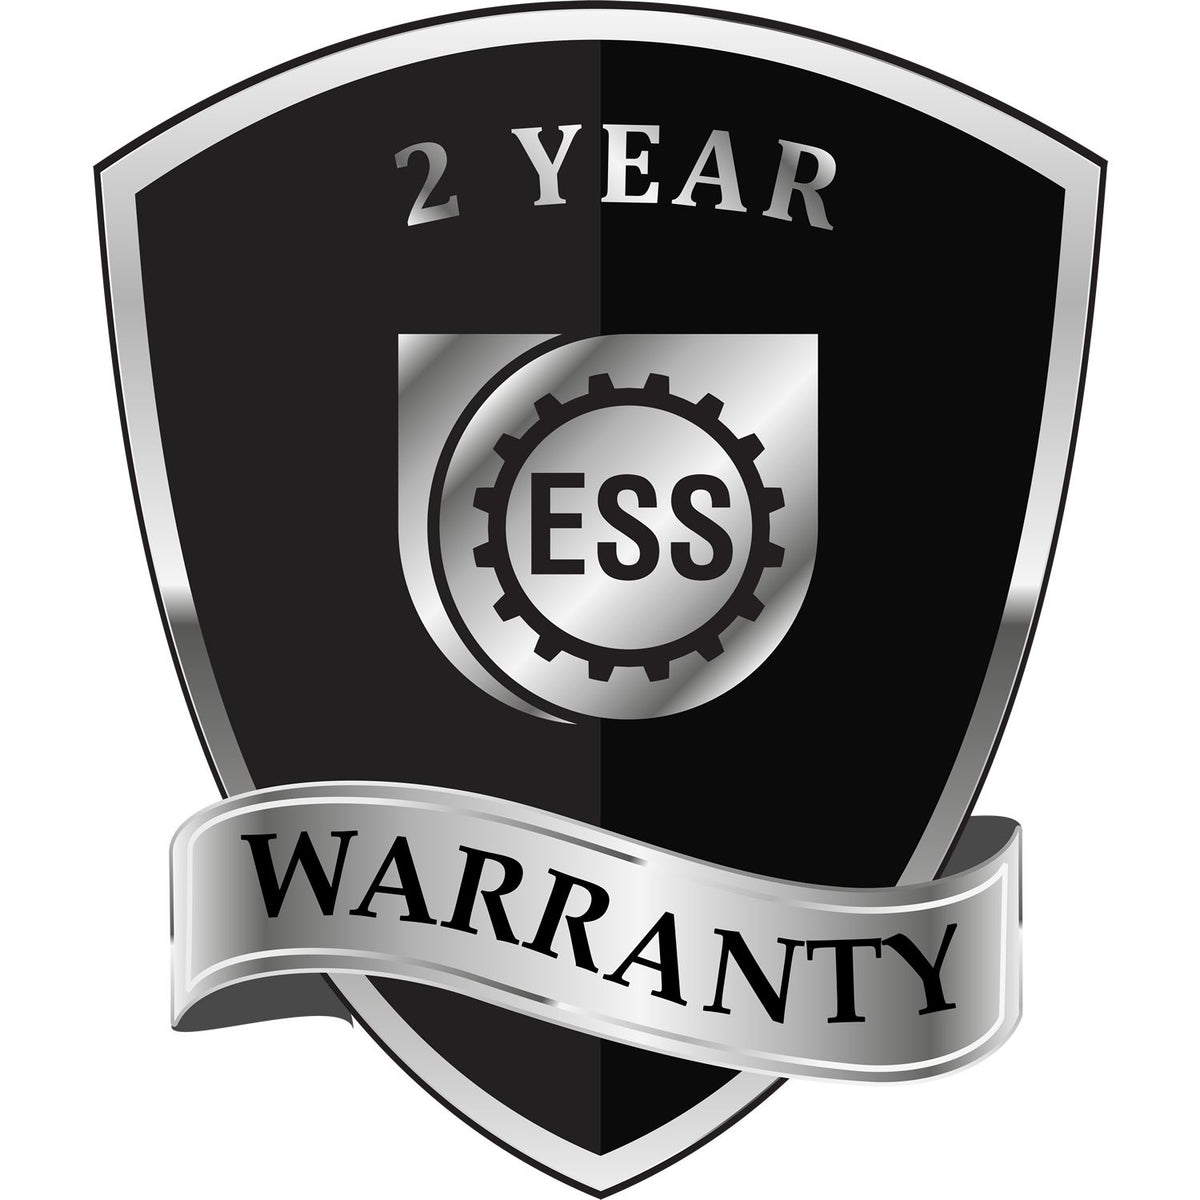 A badge or emblem showing a warranty icon for the Soft Idaho Professional Engineer Seal